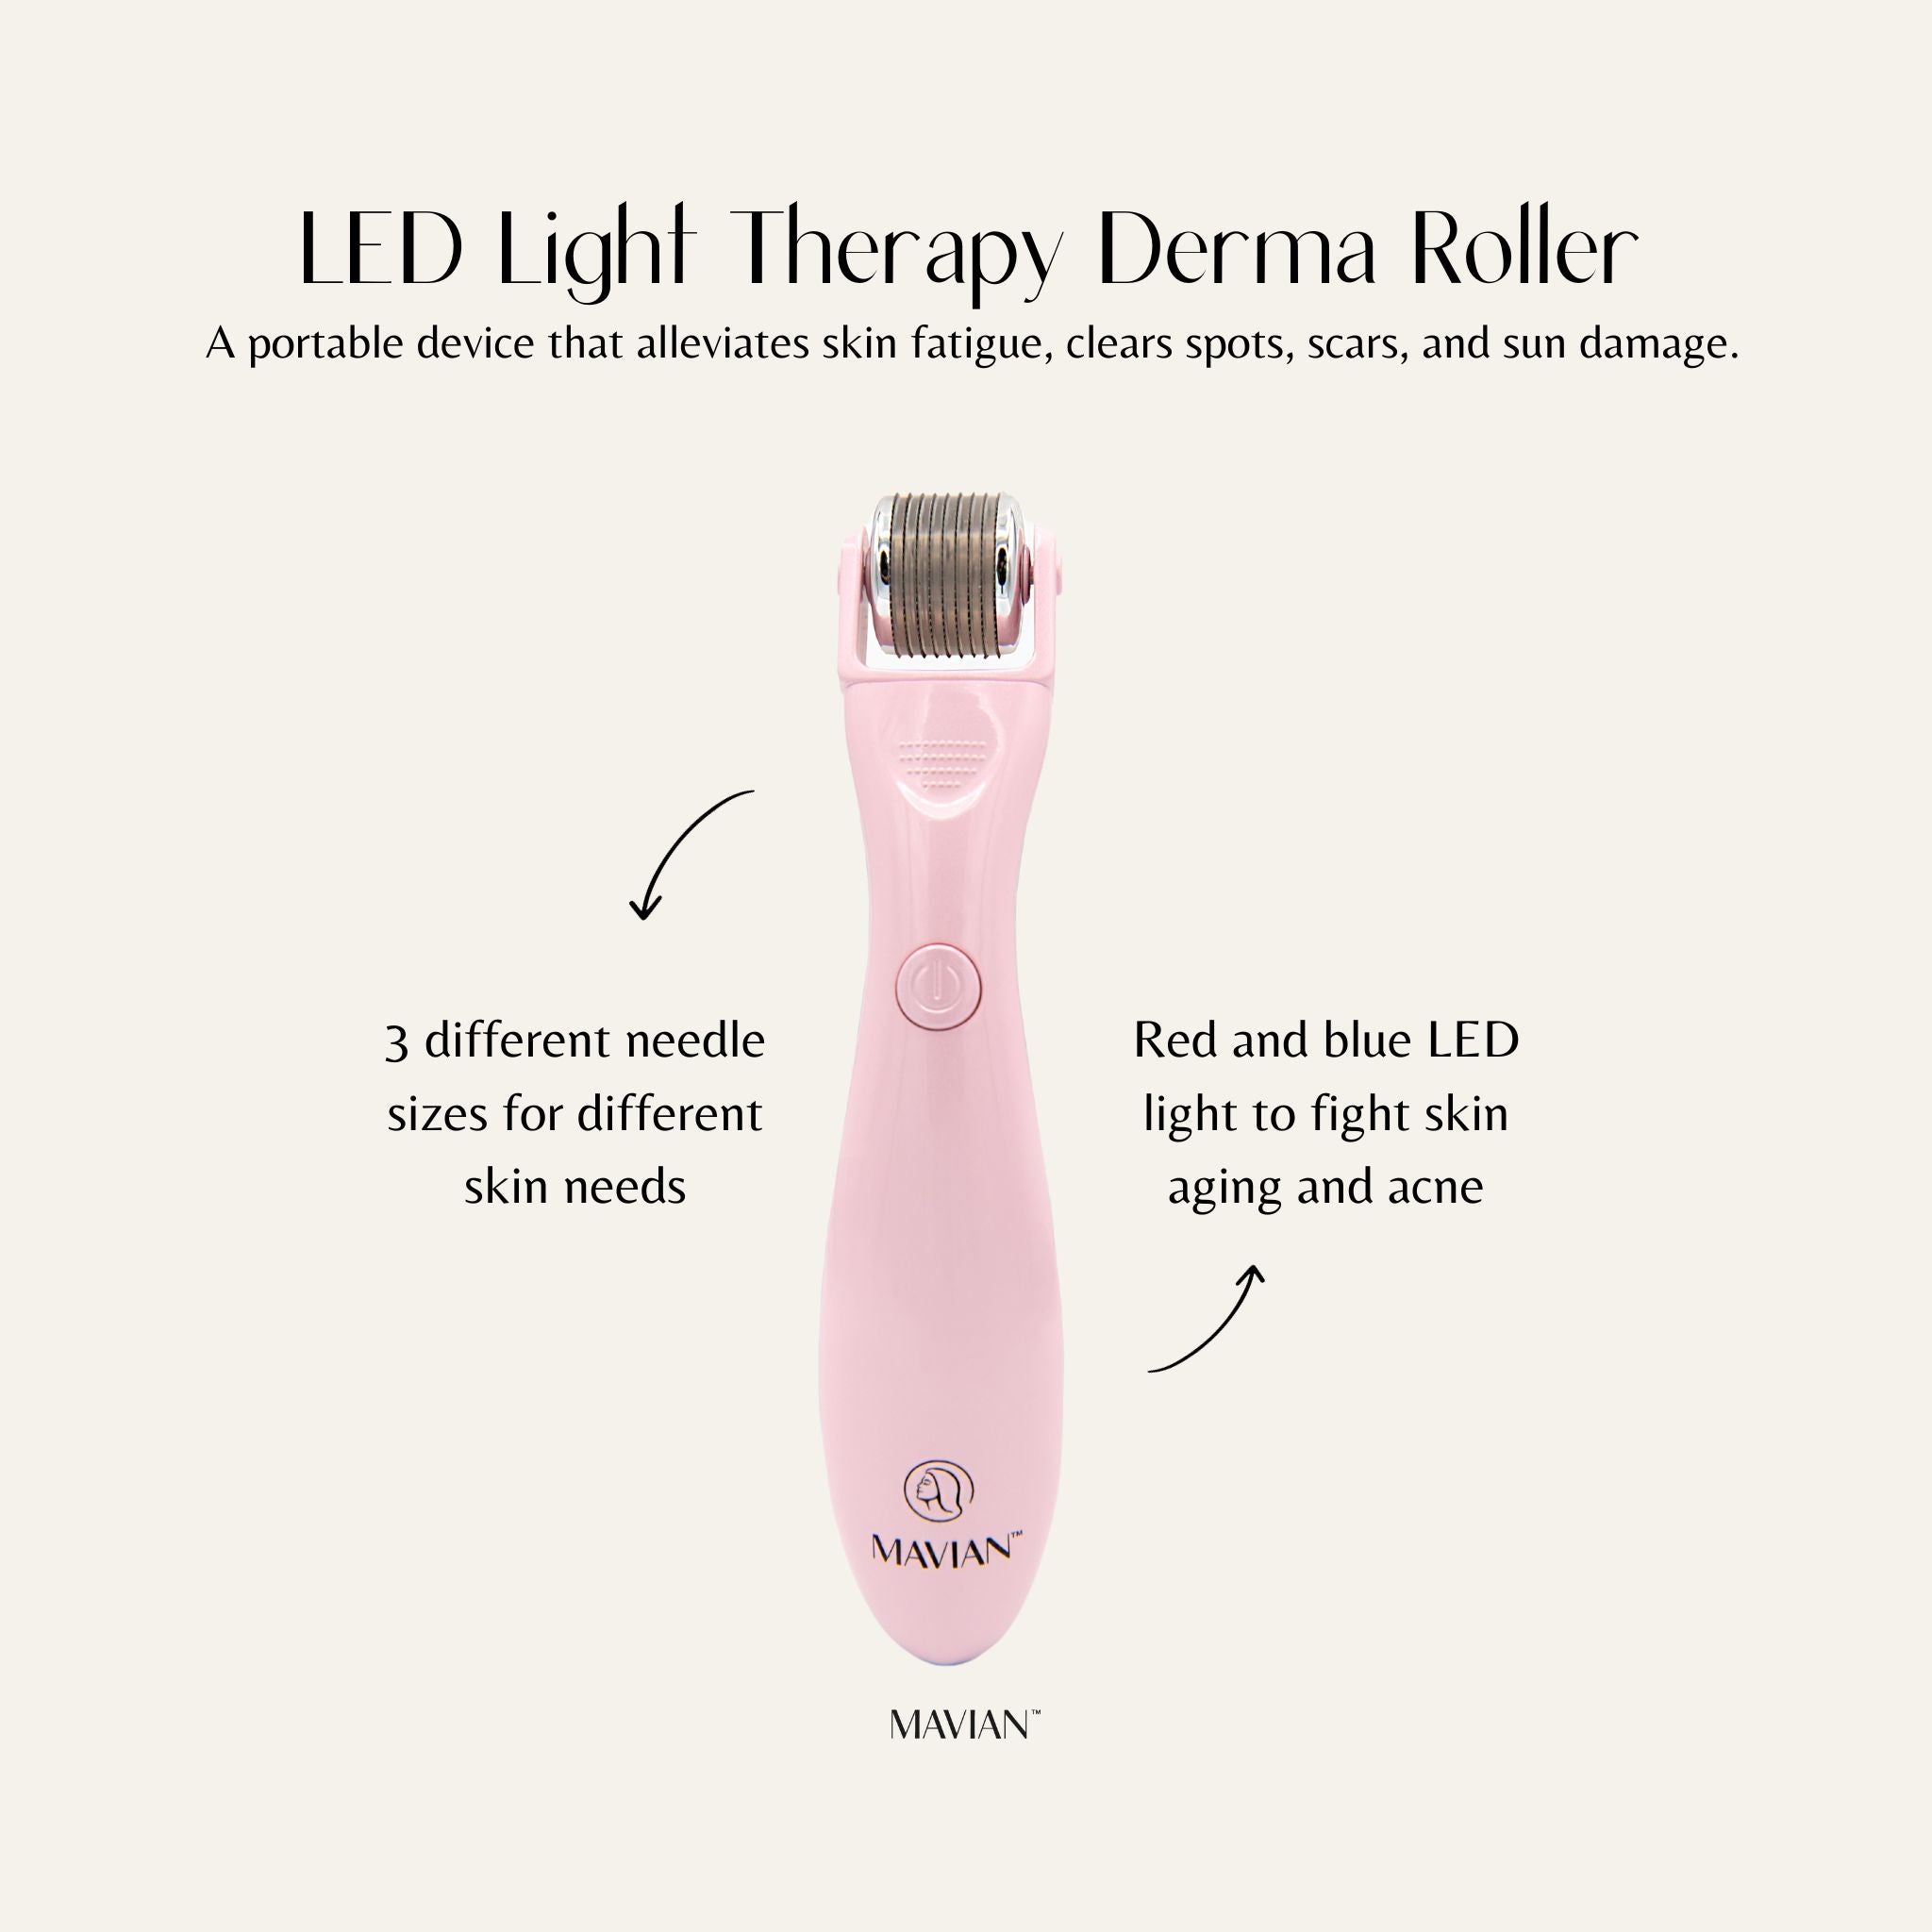 Led Light Therapy Derma Roller from Mavian Beauty